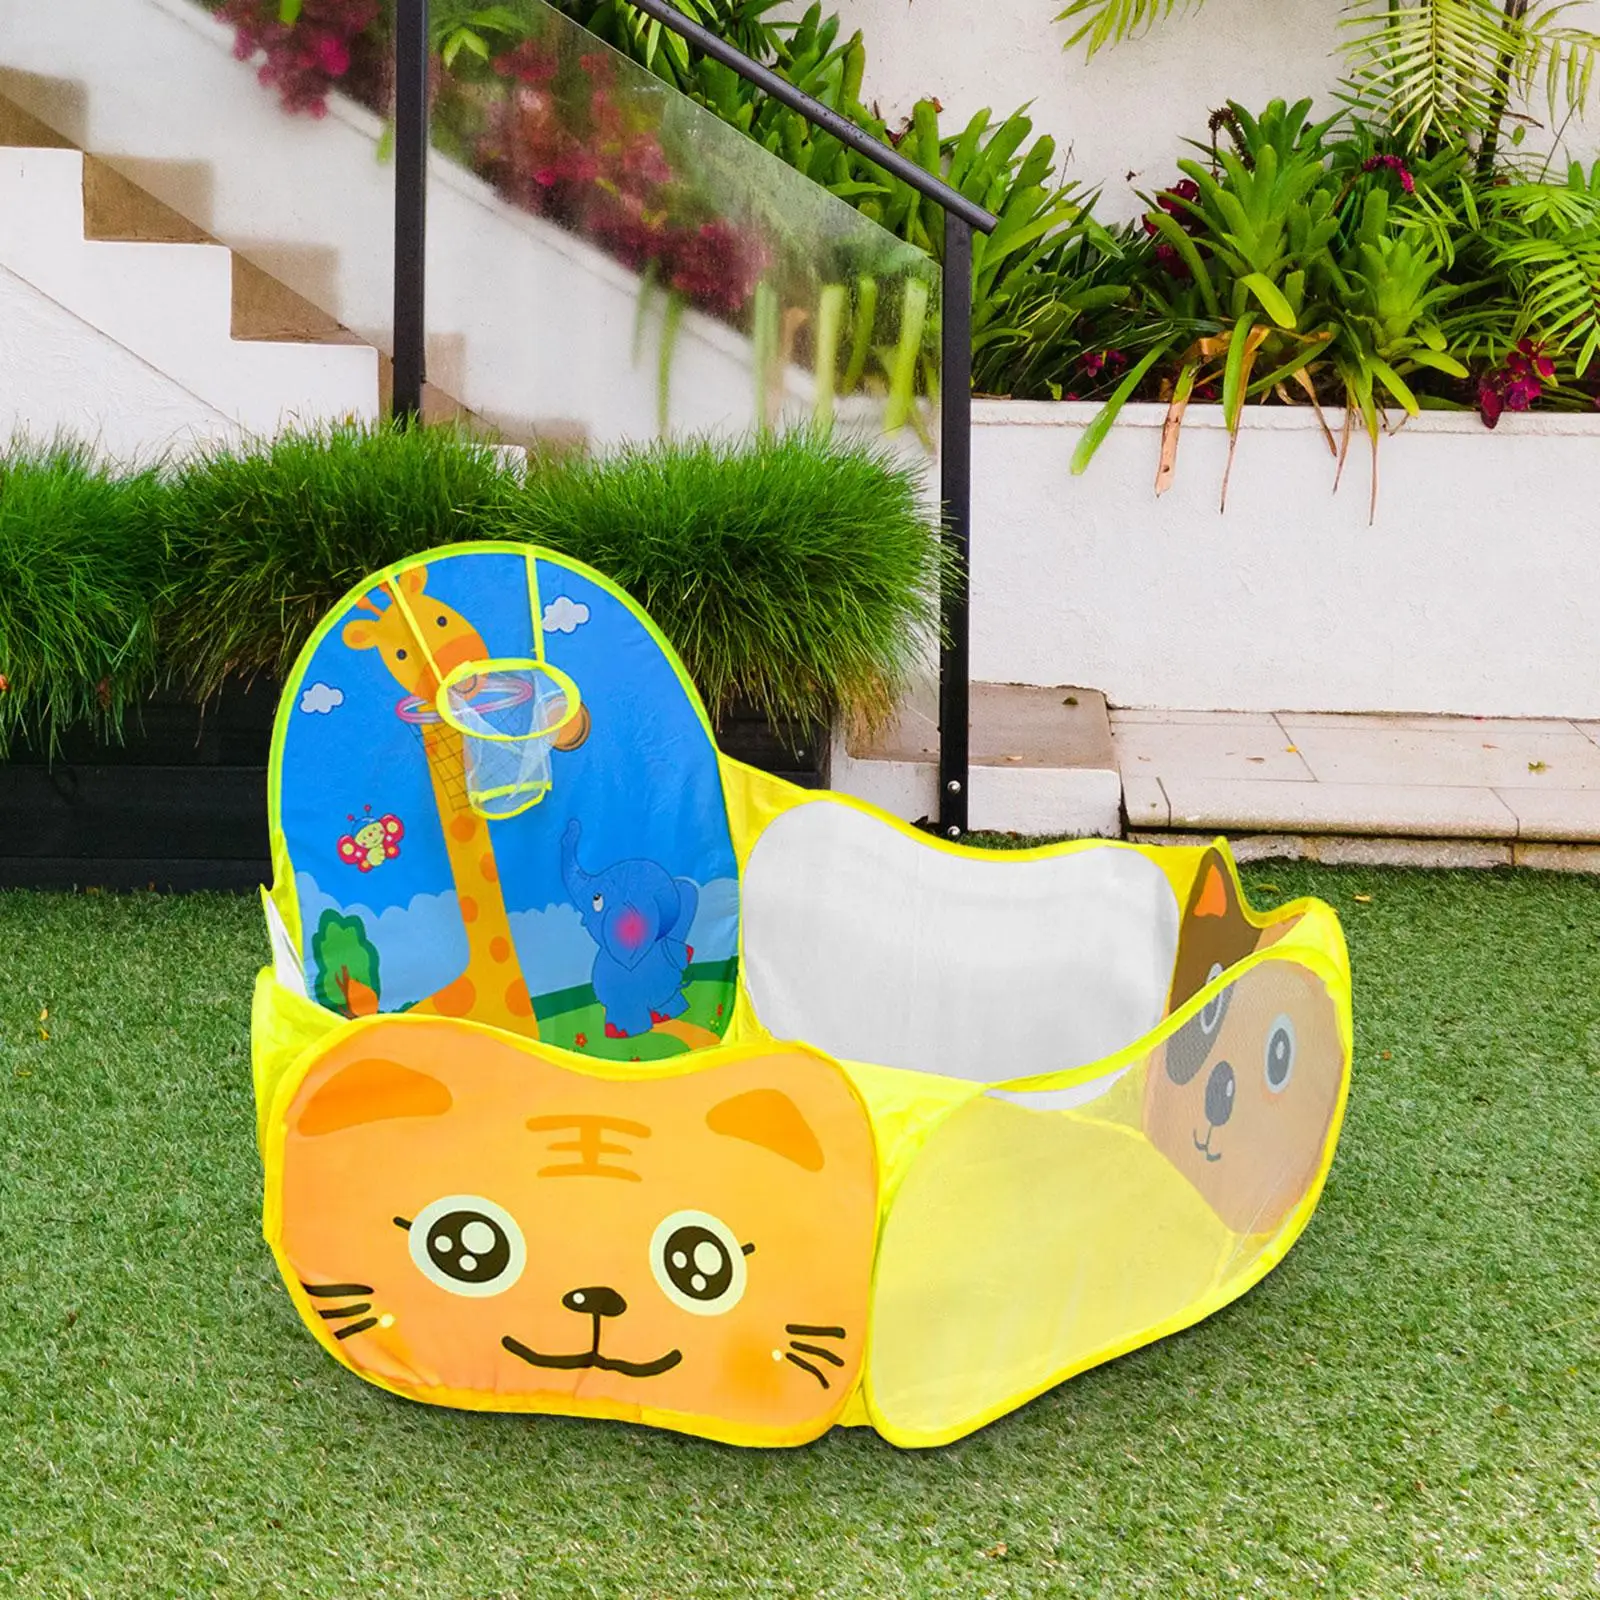 Kids Play Tent Fence Portable Collapsible Tent for Boy Girls Kids Children